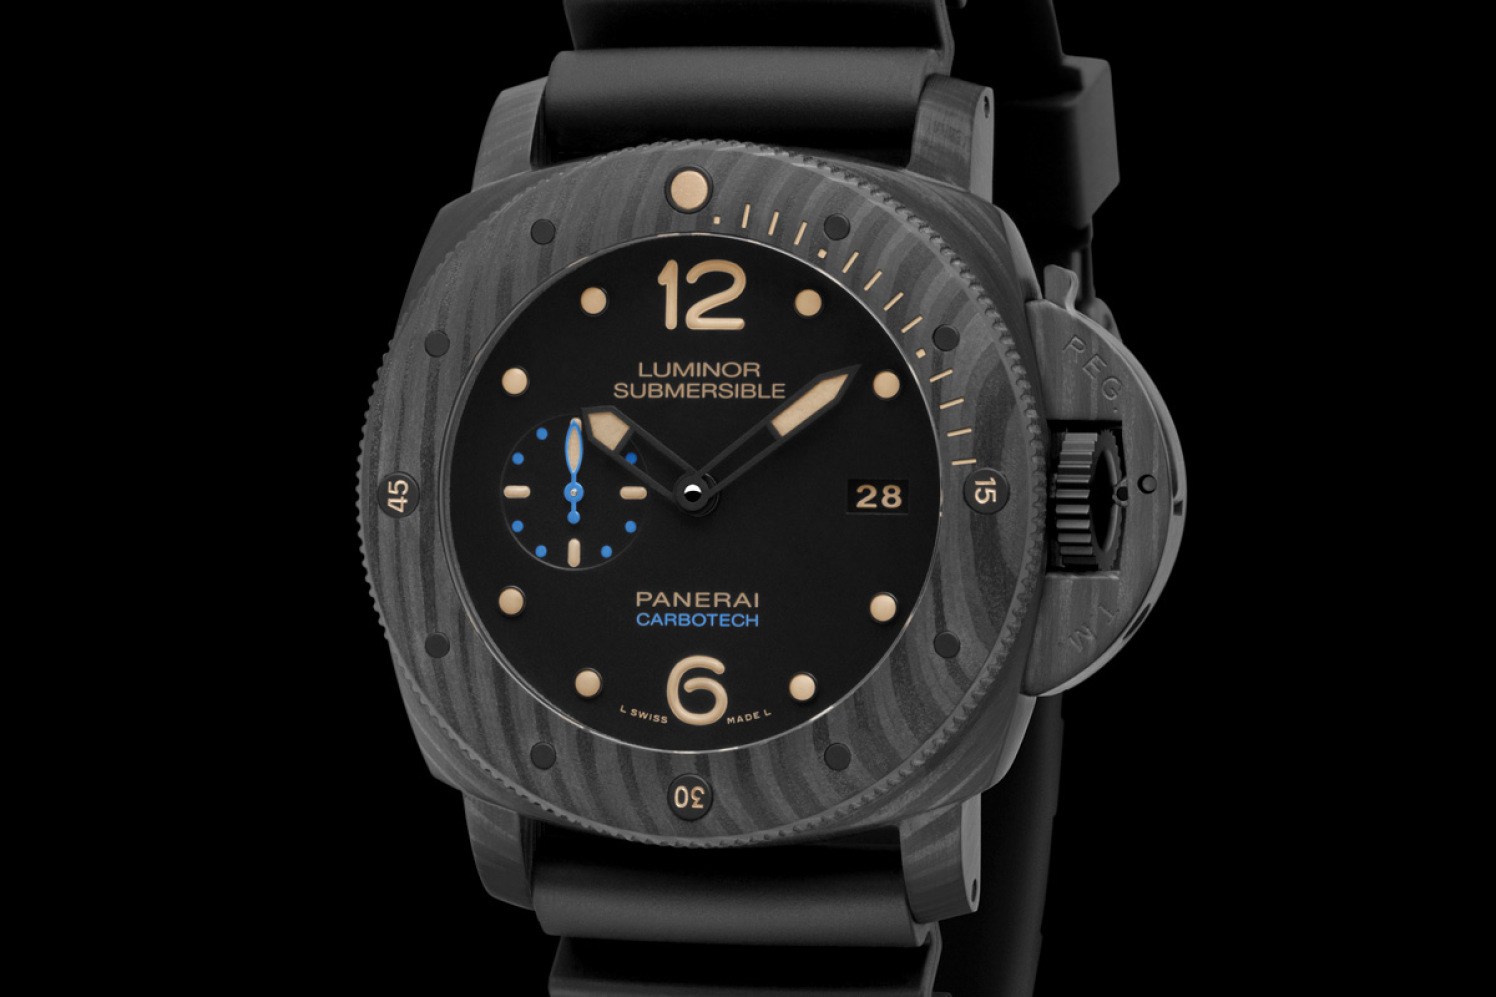 Panerai-Luminor-Submersible-1950-Carbotech-3-Days-Automatic-47mm-PAM00616-3